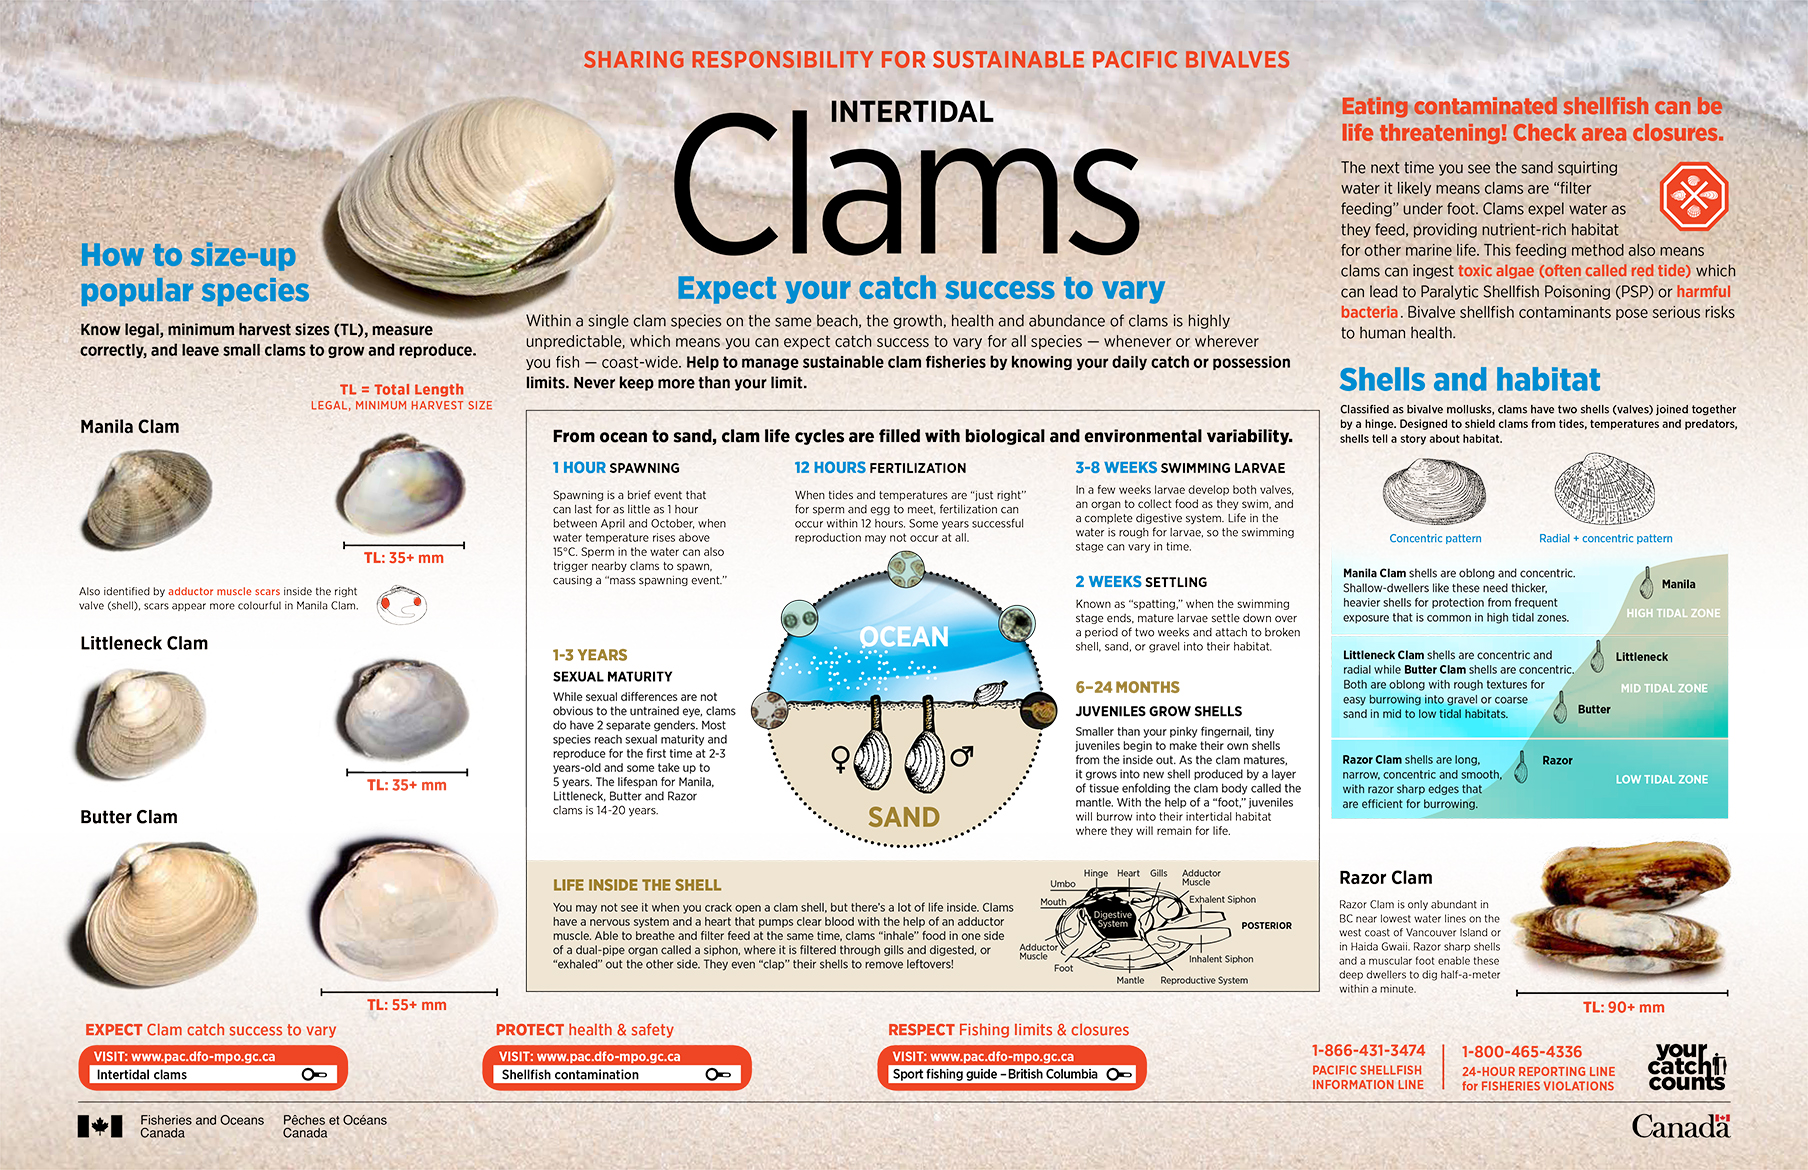 Infographic: Sharing responsibility for Pacific bivalves-Intertidal clams